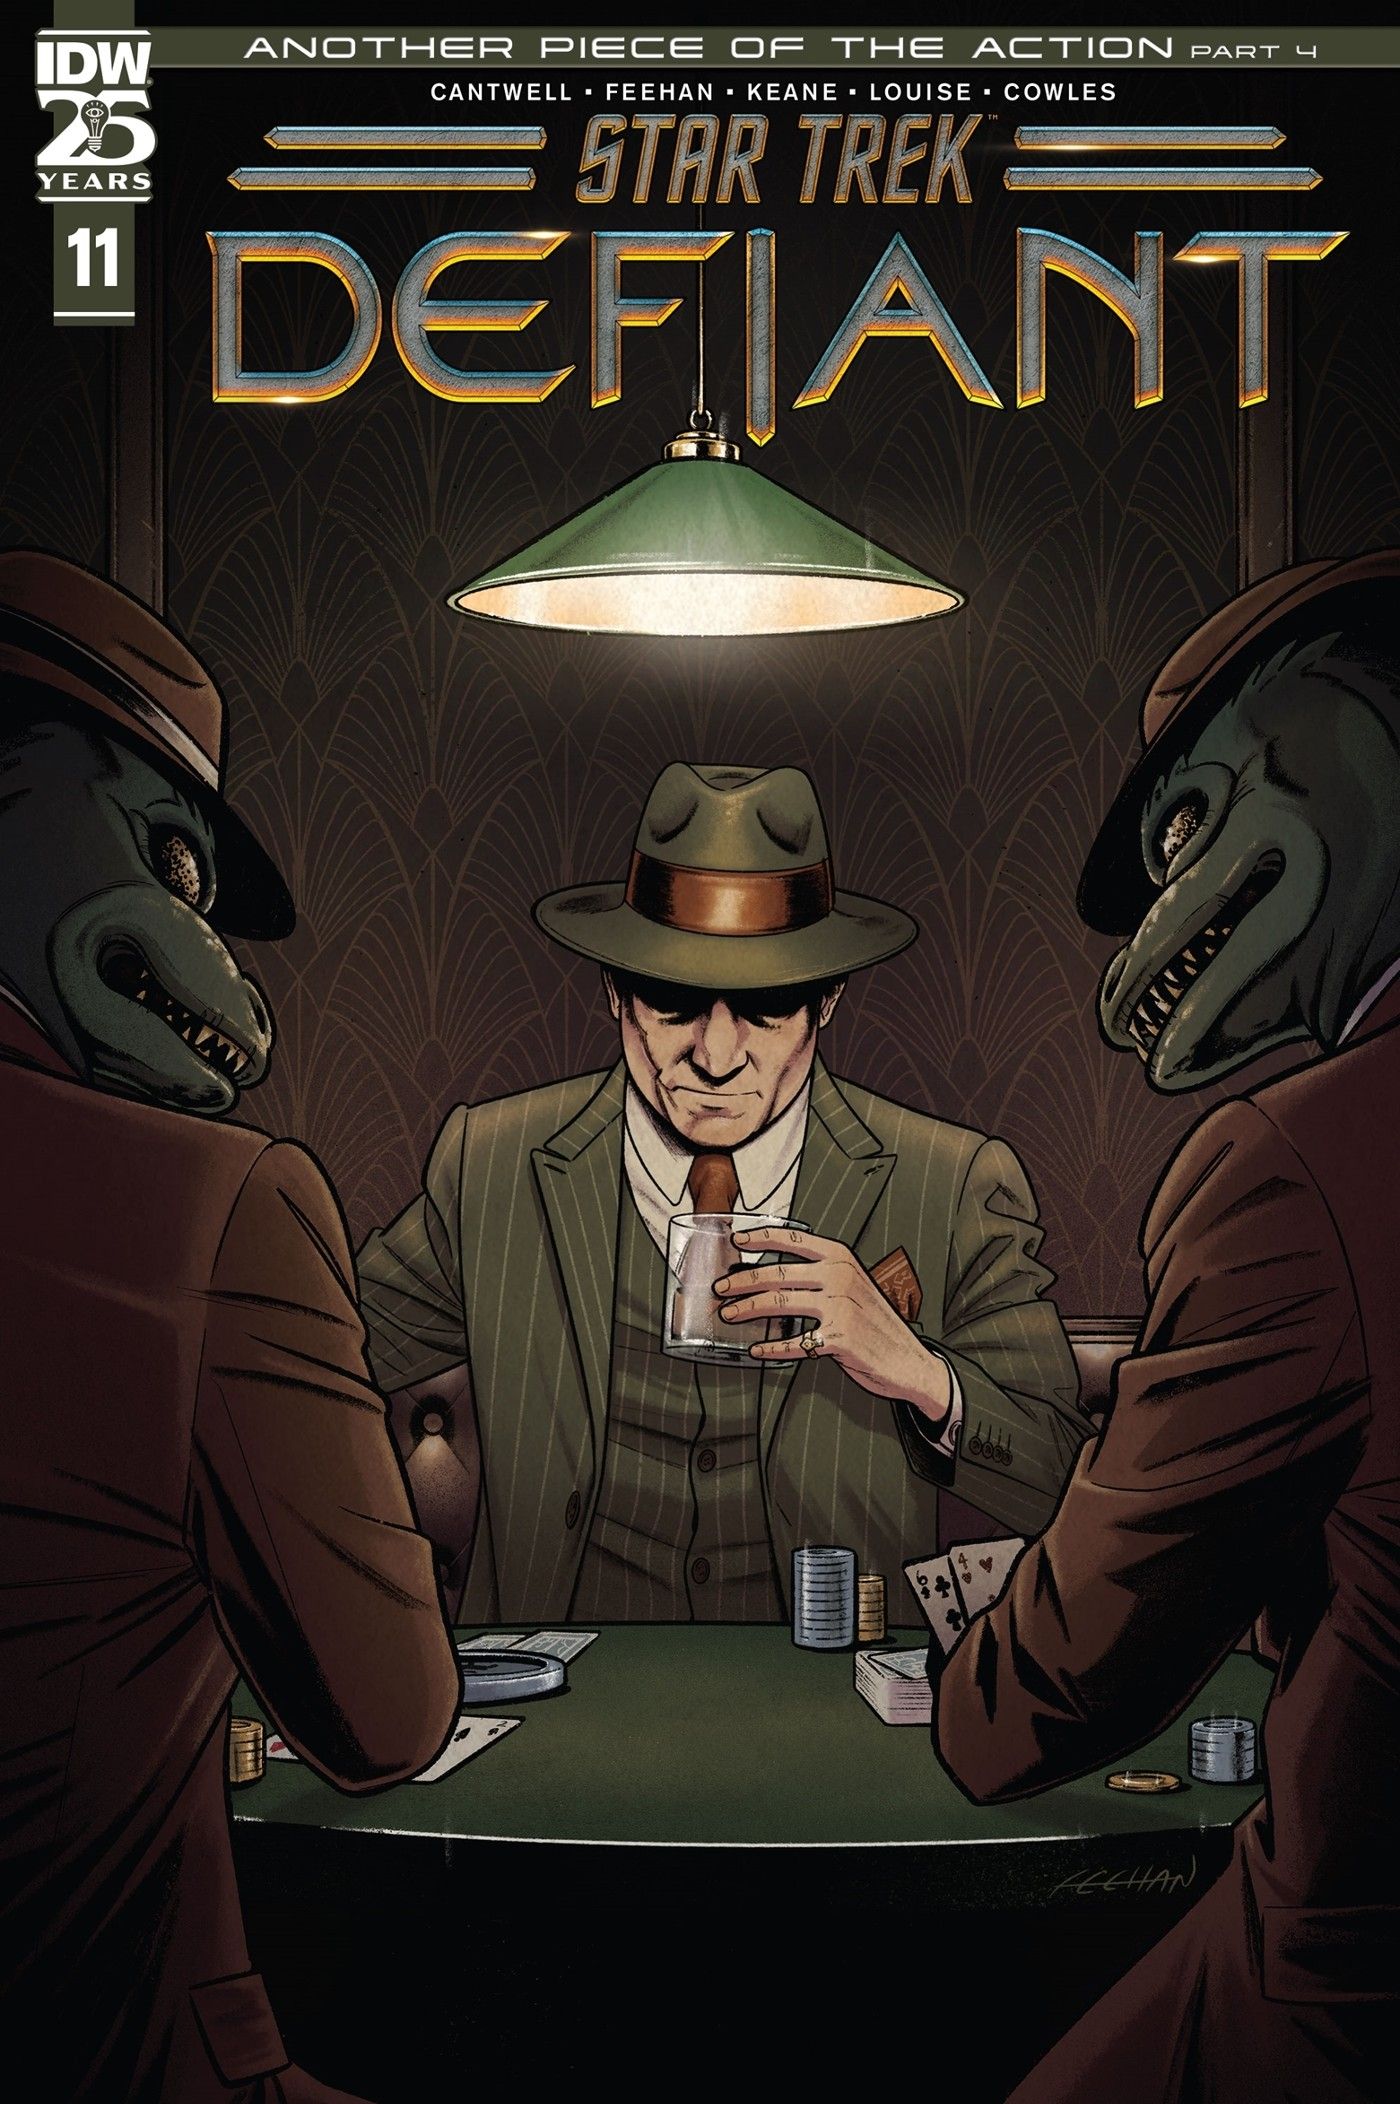 Image of two Gorns in pin-stripe suits playing poker with a human gangster.